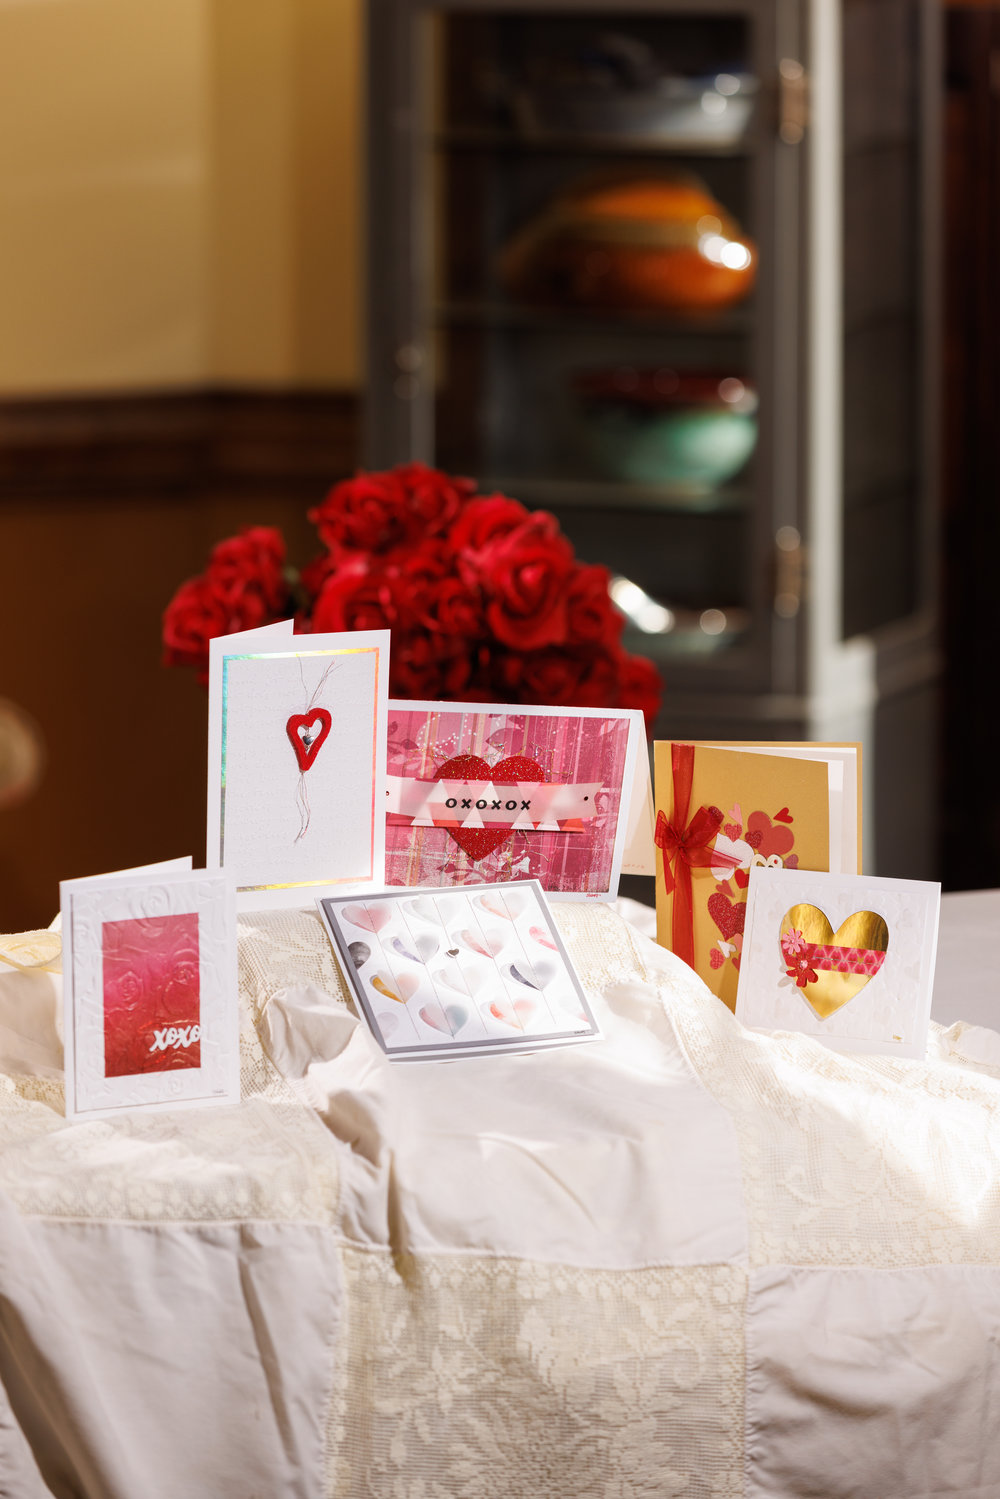 Some of the cards designed by Erika Gee Harris.